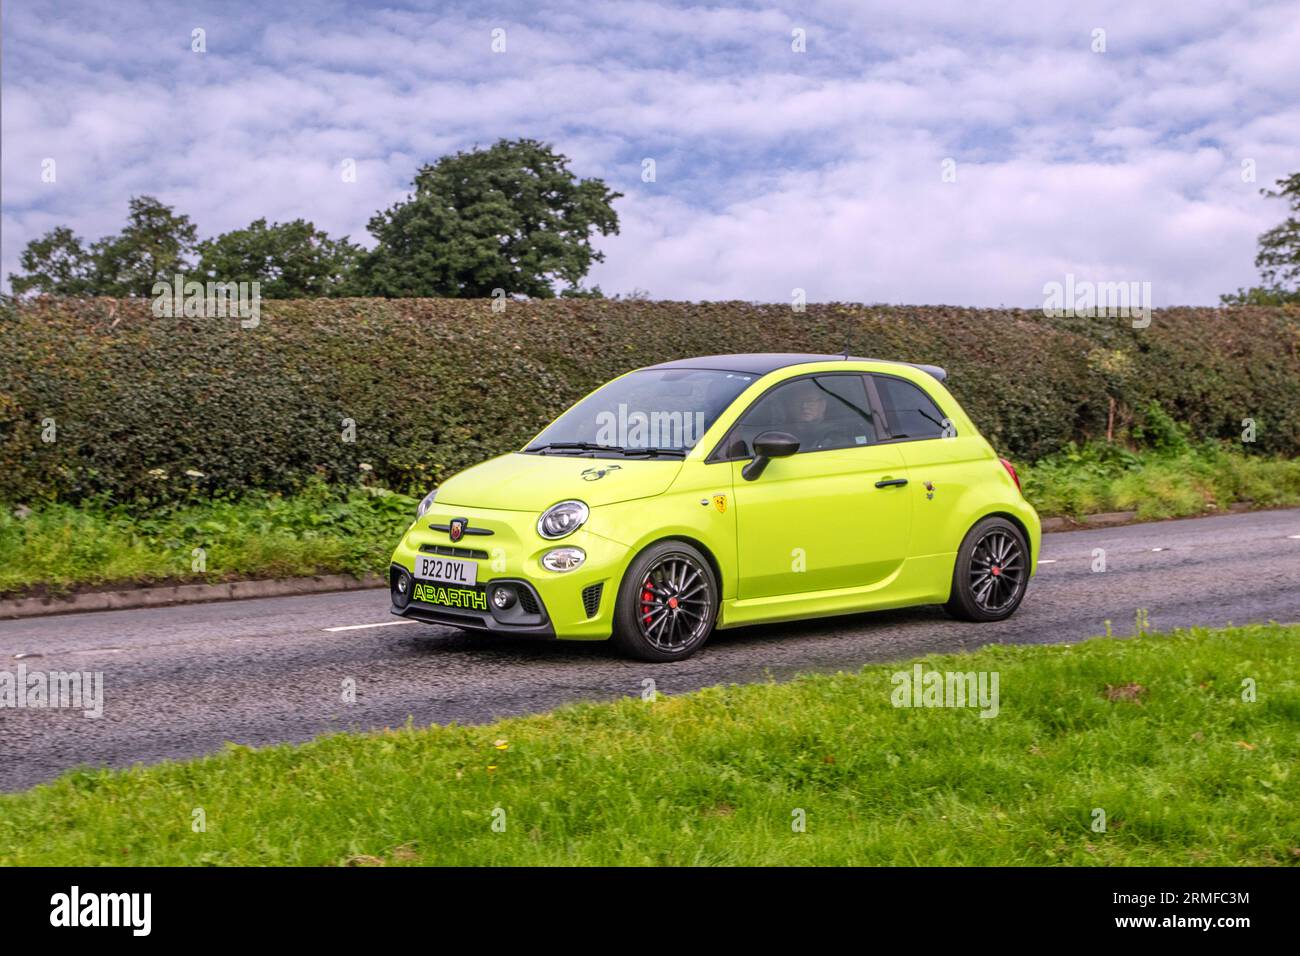 2021 Yellow Abarth 595 Competizione T-Jet 180 Green Car Hatchback Petrol 1368 cc, in-line 4-cylinder 1.4L Turbo T-Jet engine; travelling on rural roads in Congleton, UK Stock Photo